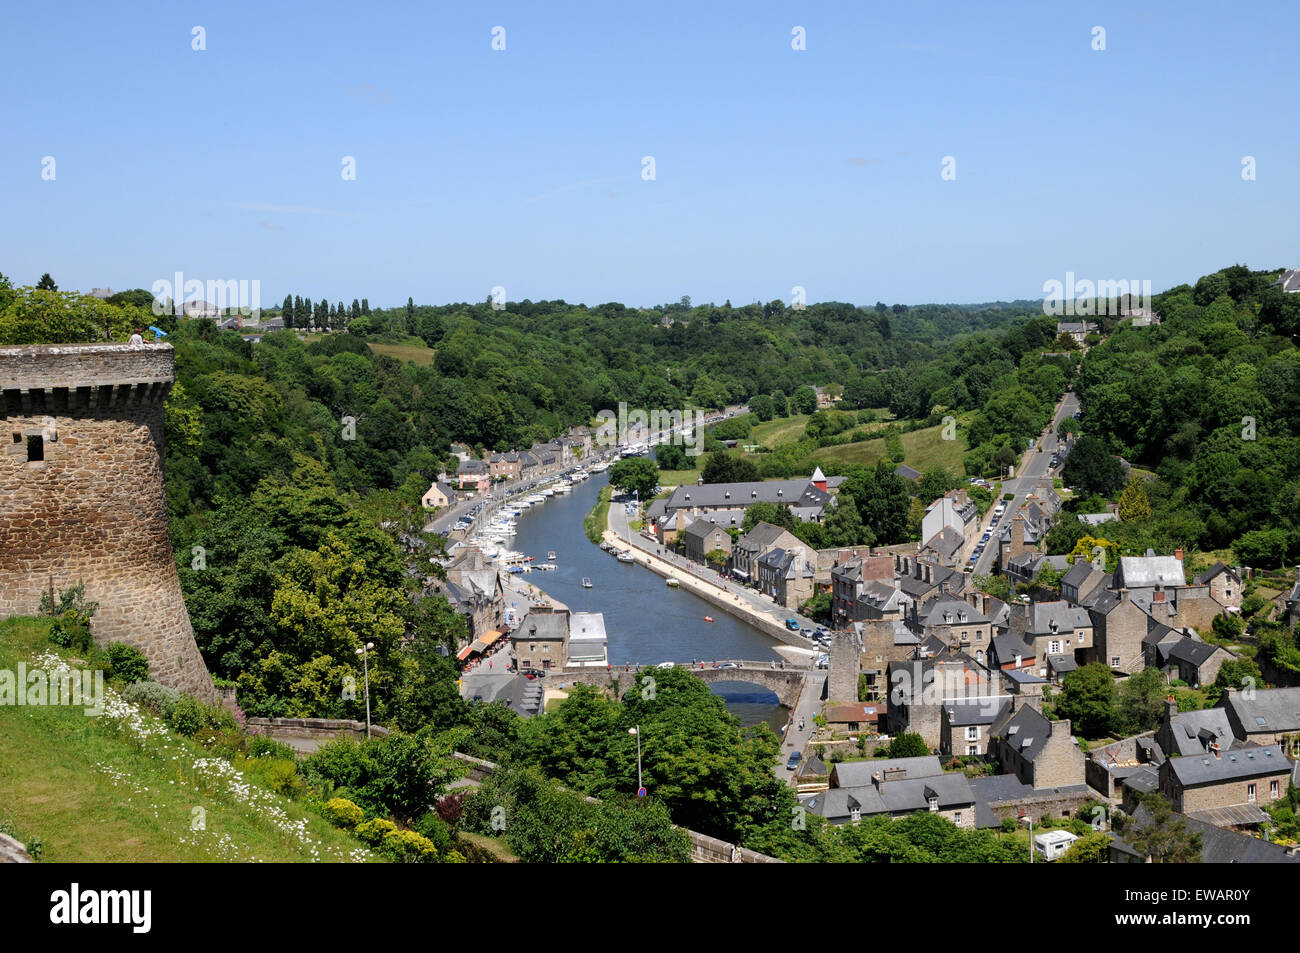 View from the ramparts at the medieval town of Dinan, Brittany looking down towards the River Rance, the Gothic Bridge and port. Stock Photo